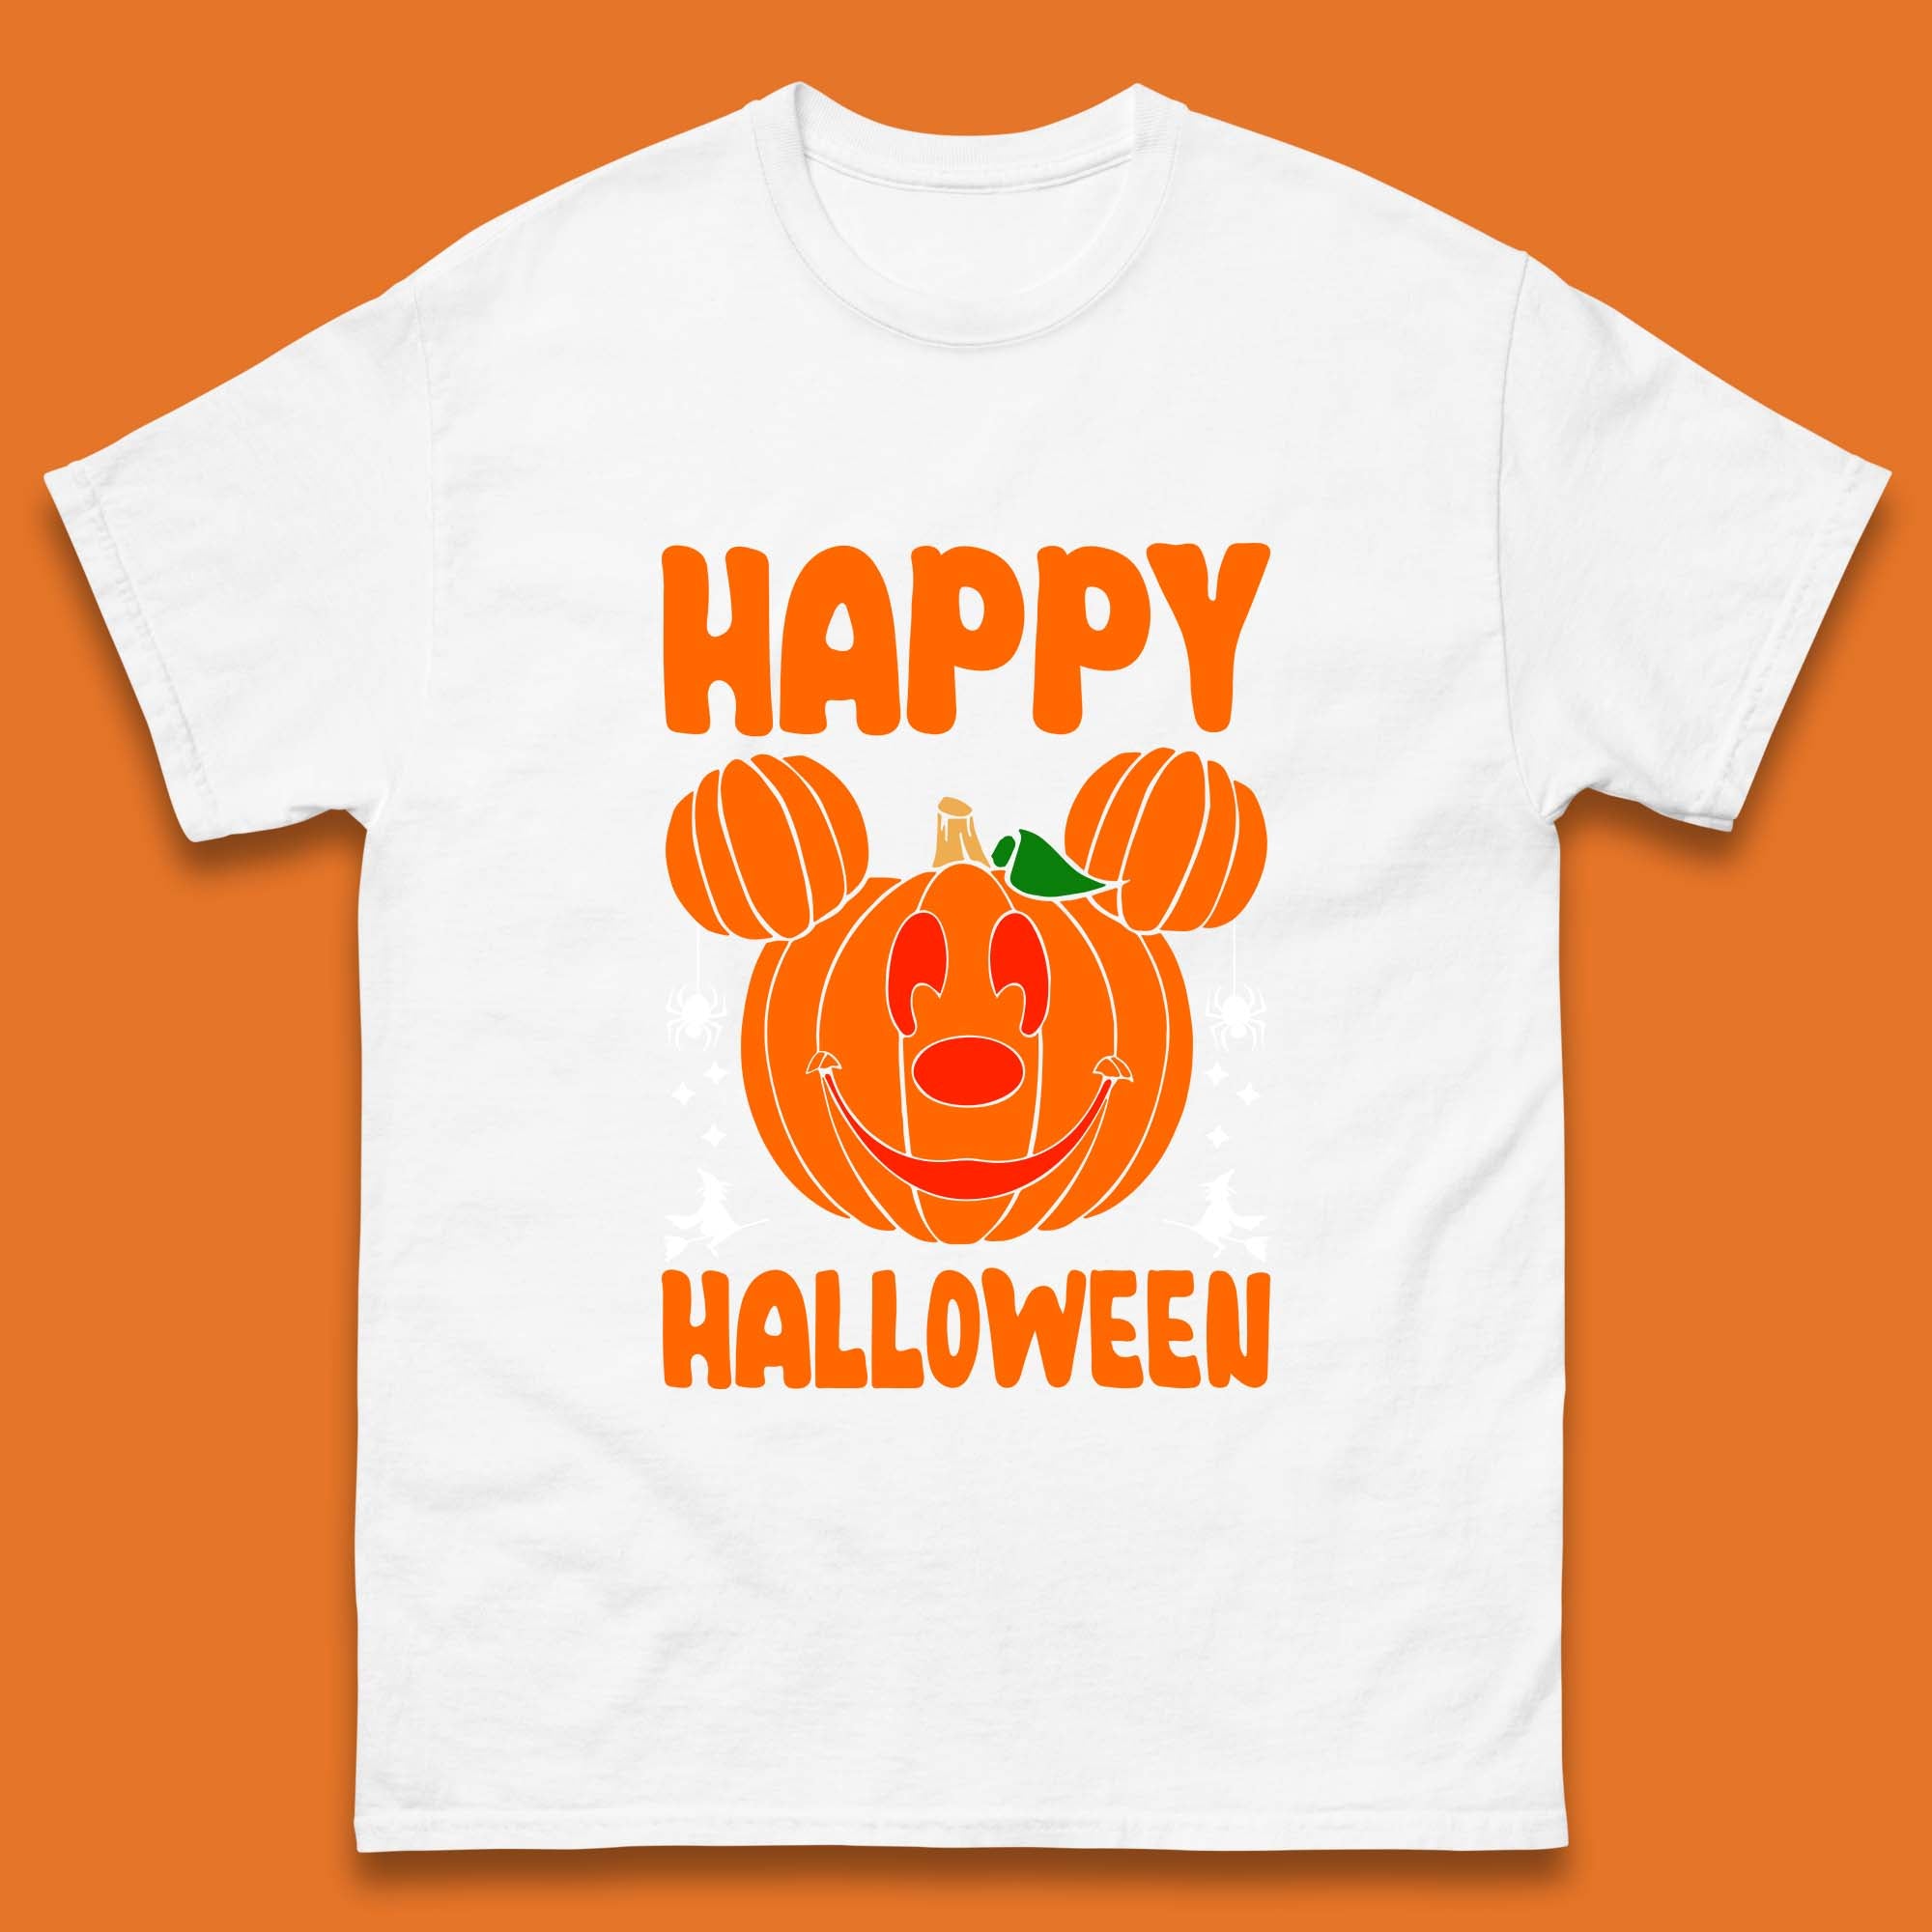 Mickey Mouse Halloween Costume T-Shirt